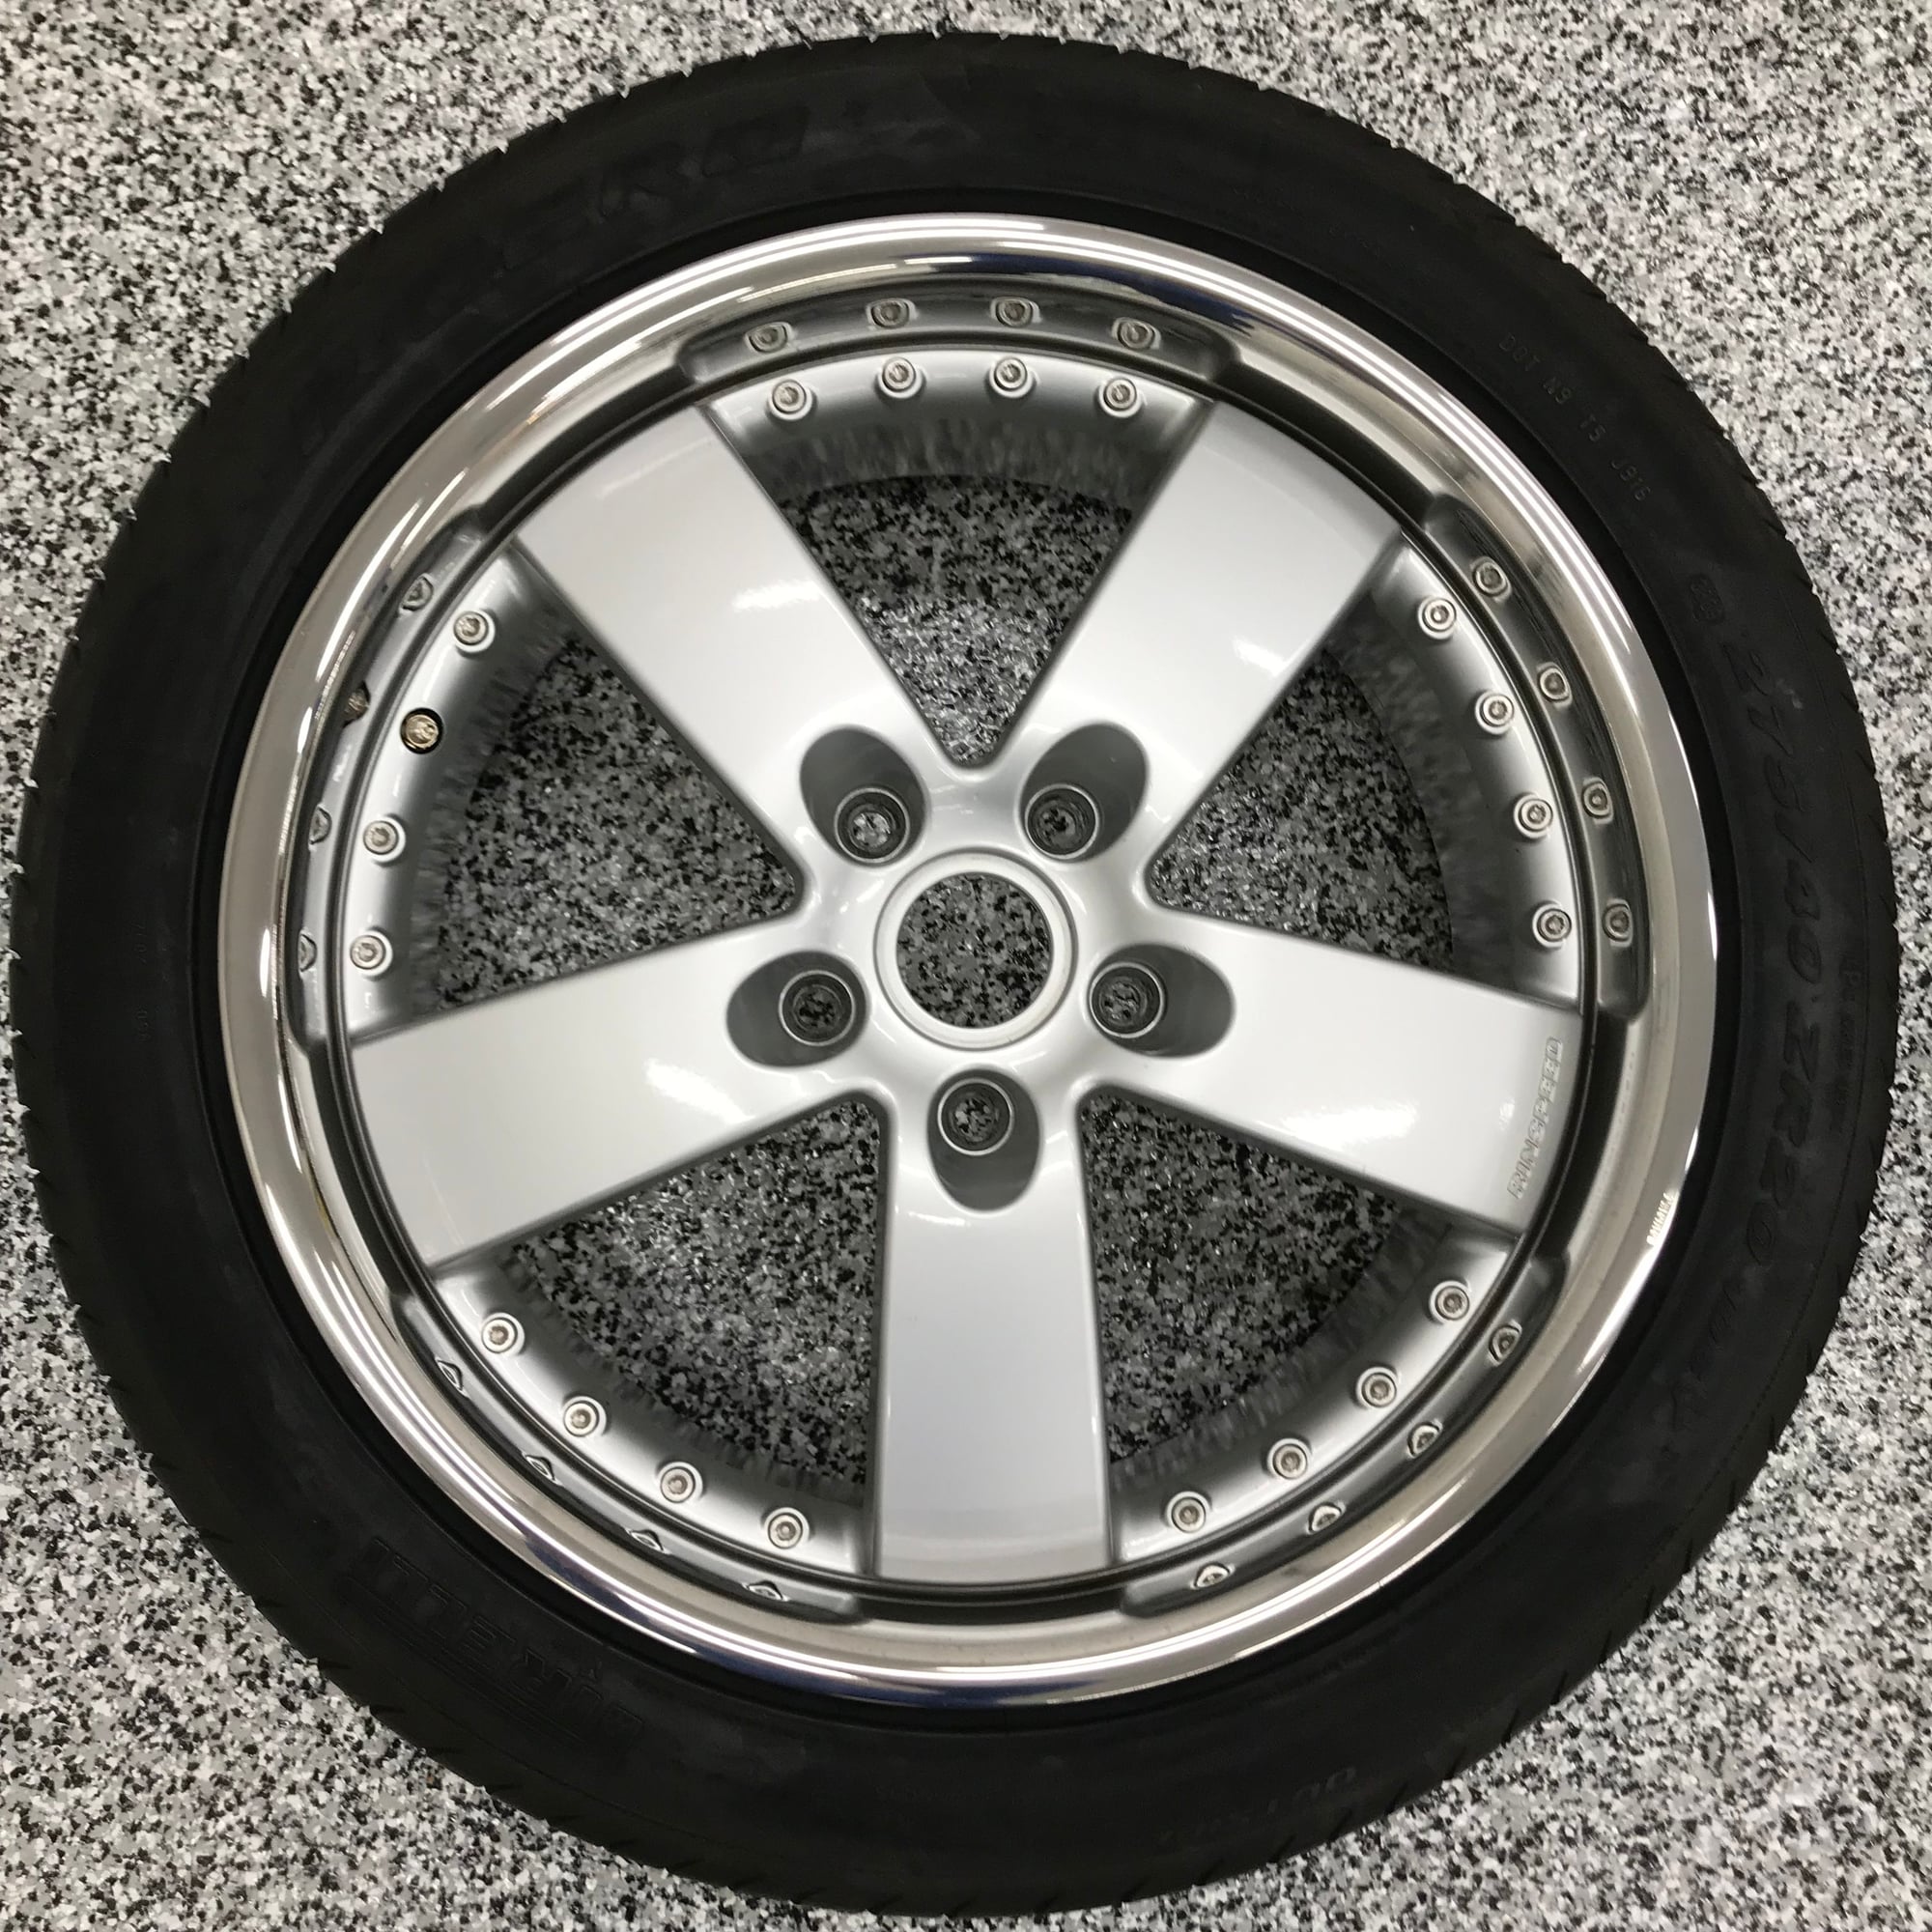 Wheels and Tires/Axles - Genuine 20" Rinspeed wheels with near new Pirelli P-Zero summer tires - Used - 2006 to 2019 Porsche Cayenne - Beaverton, OR 97005, United States